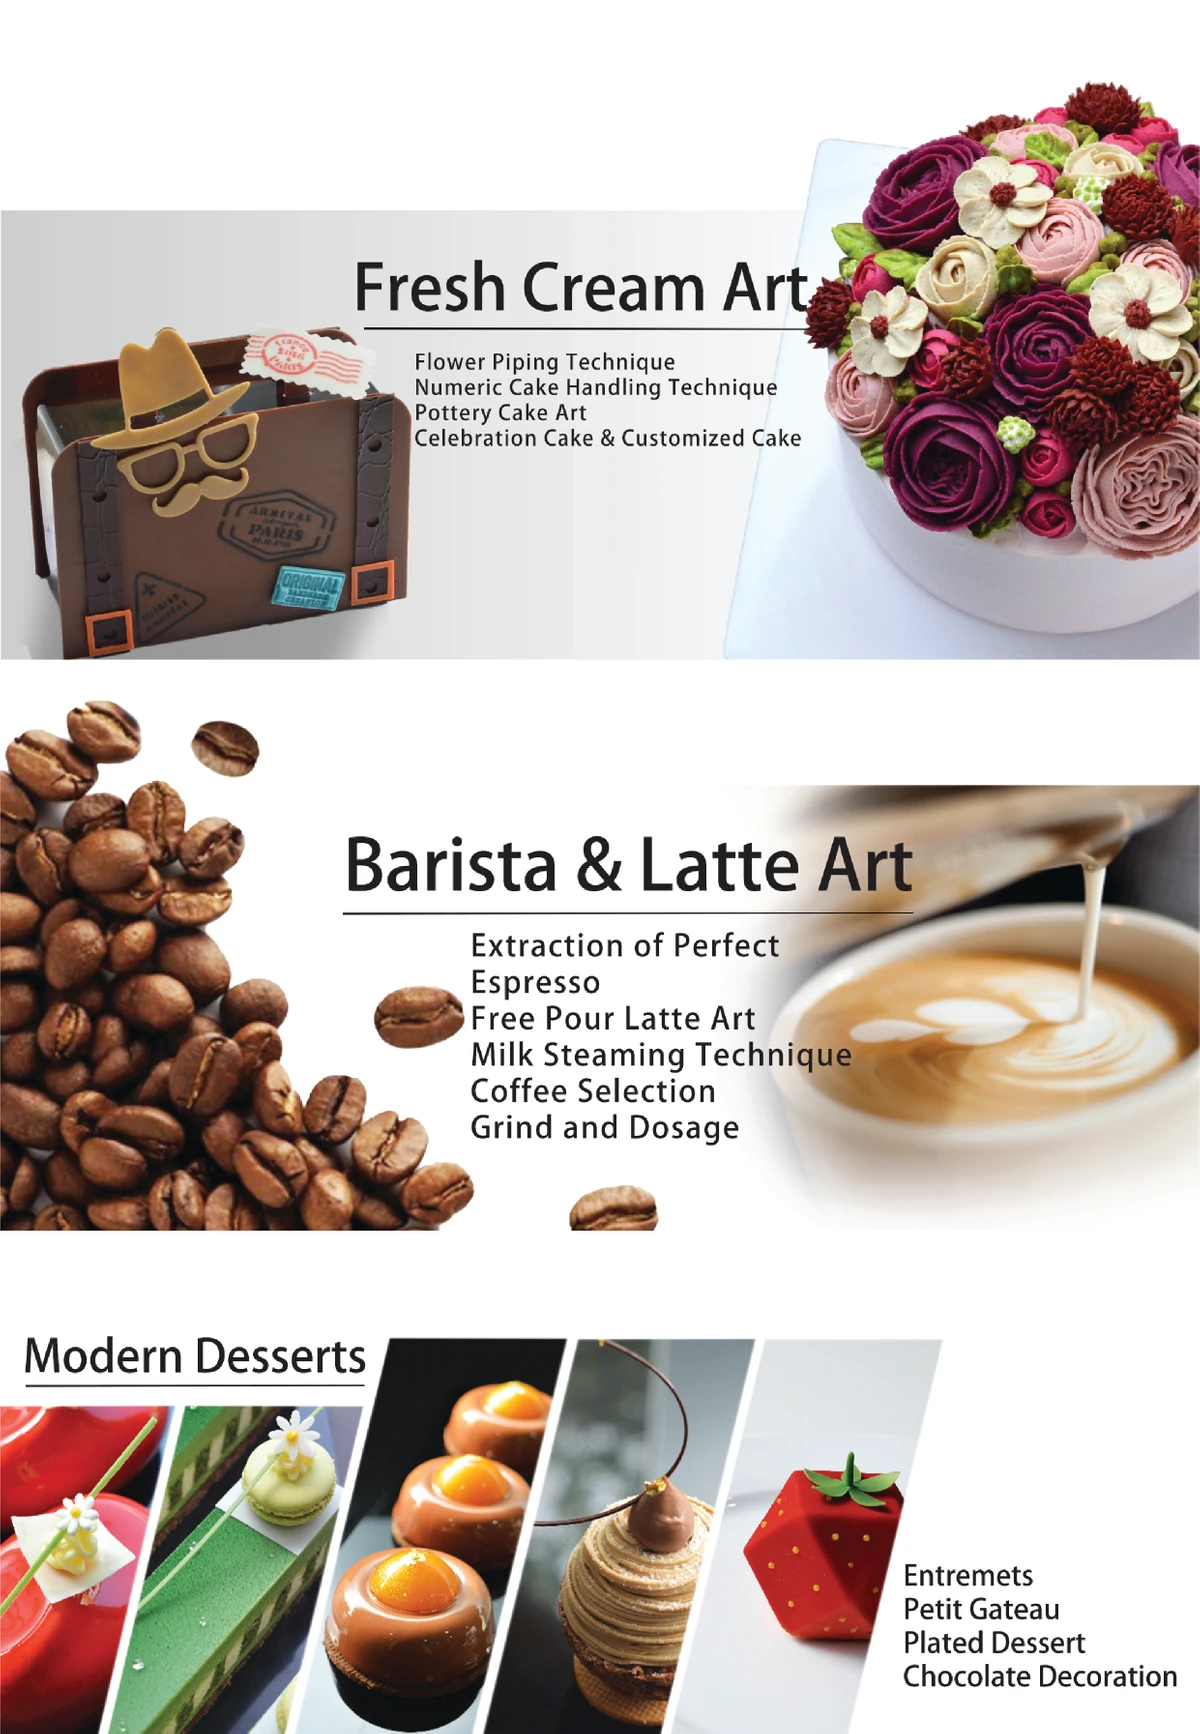 Diploma of Bakery [Fresh Cream Art  (Flower Piping Technique, Numeric Cake Handling, Pottery Cake Art, Celebration Cake & Customized Cake) | Barista & Latte Arts (Extraction of Perfect, Espresso, Free Pour Latte Art, Coffee Selection, Grind and Dosage)  | Modern Desserts (Entremets, Petit Gateau, Plated Dessert , Chocolate Decoration)] 